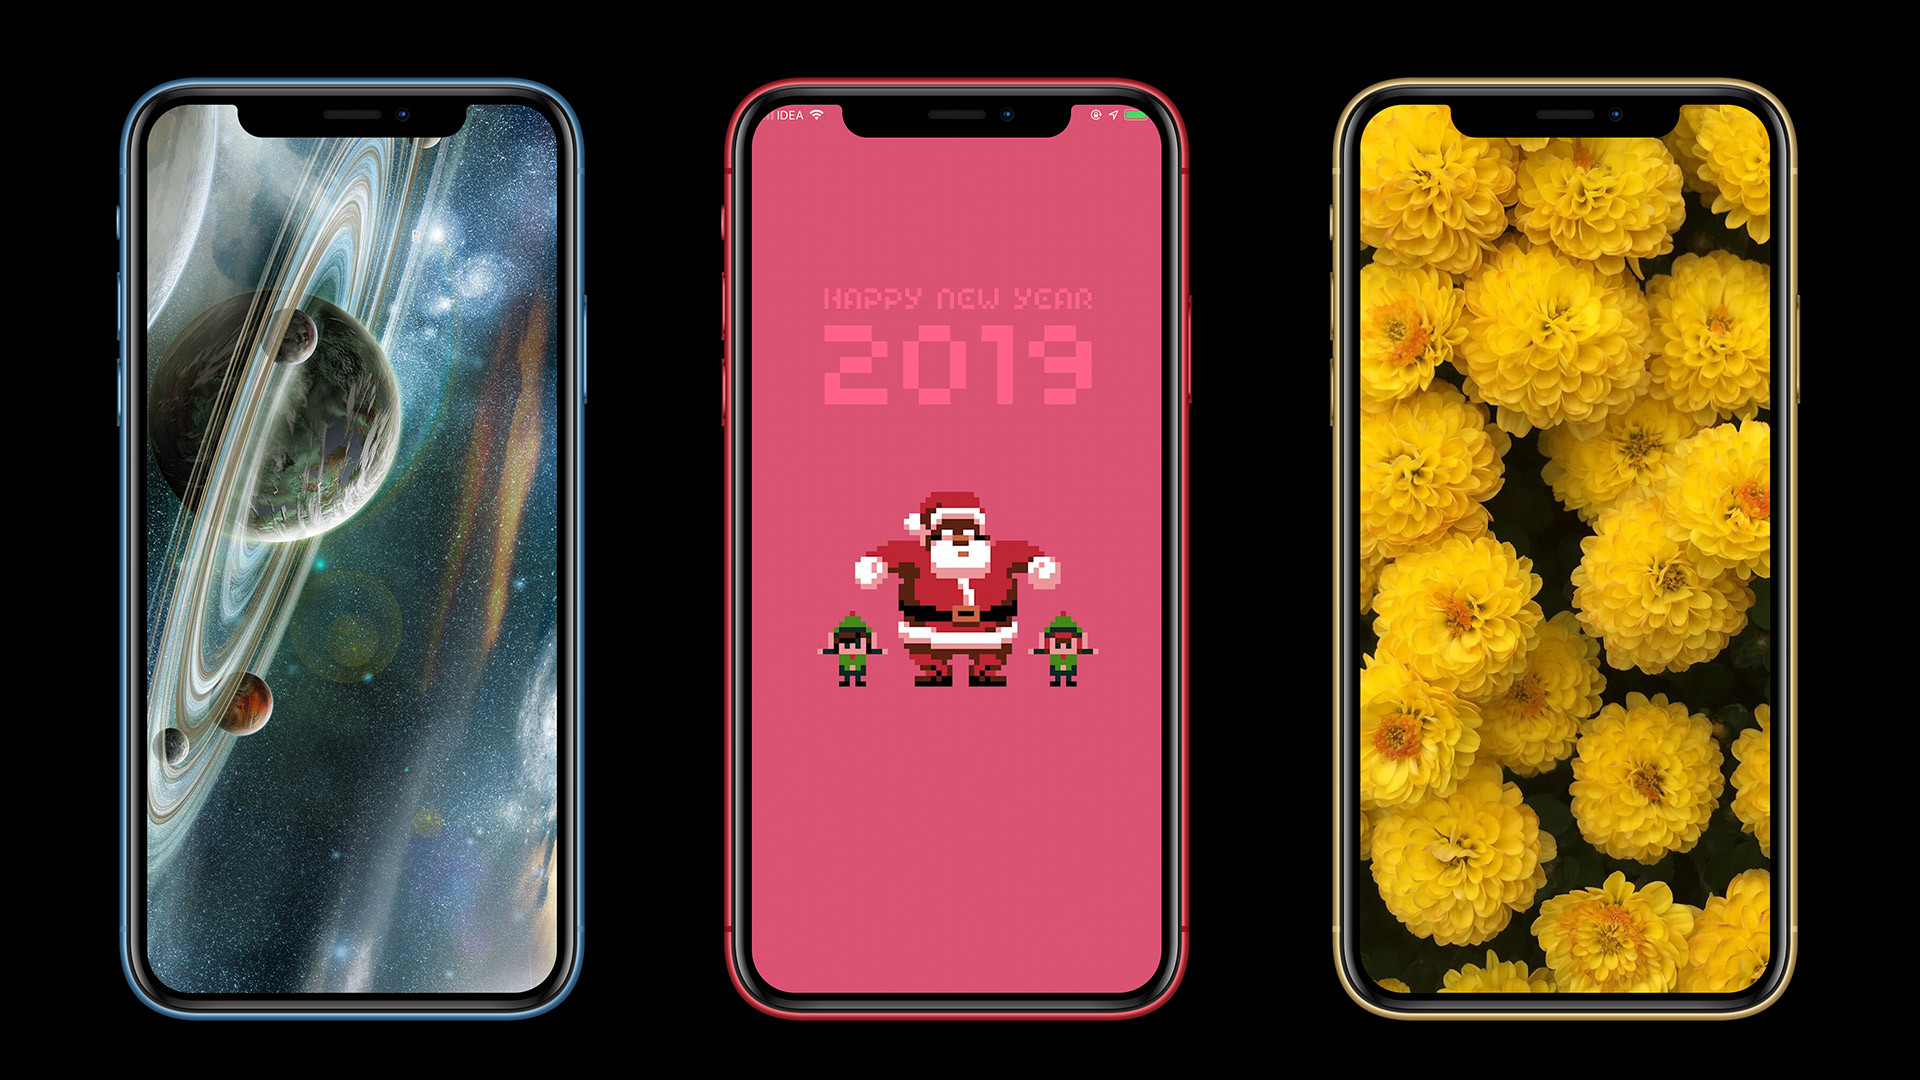 1920x1080 Best iPhone XR Wallpaper Apps of 2019: Dynamic Images With Charming Themes